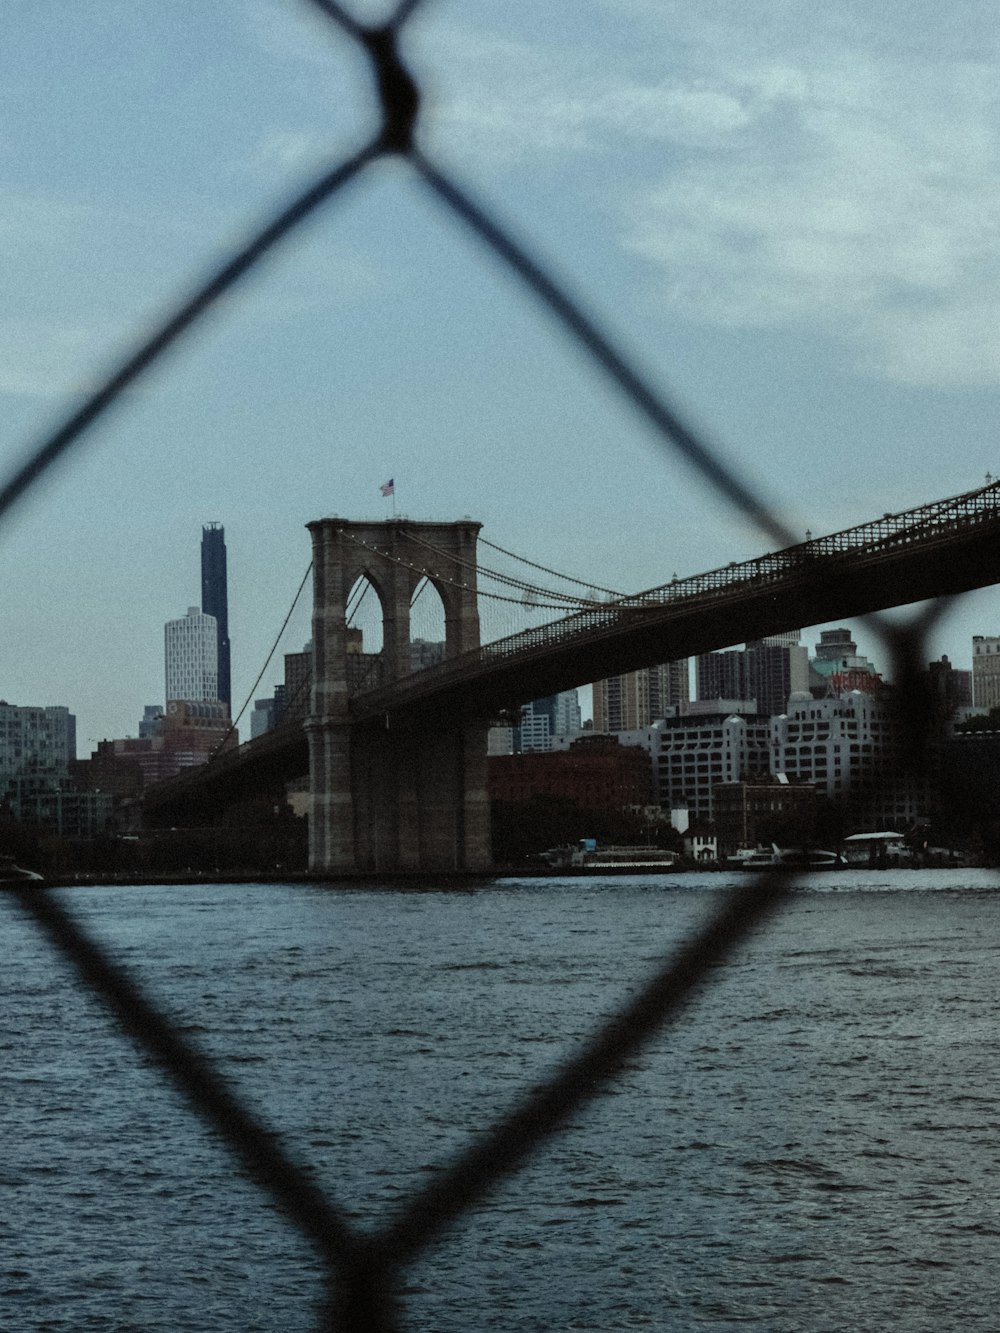 a view of the brooklyn bridge through a chain link fence